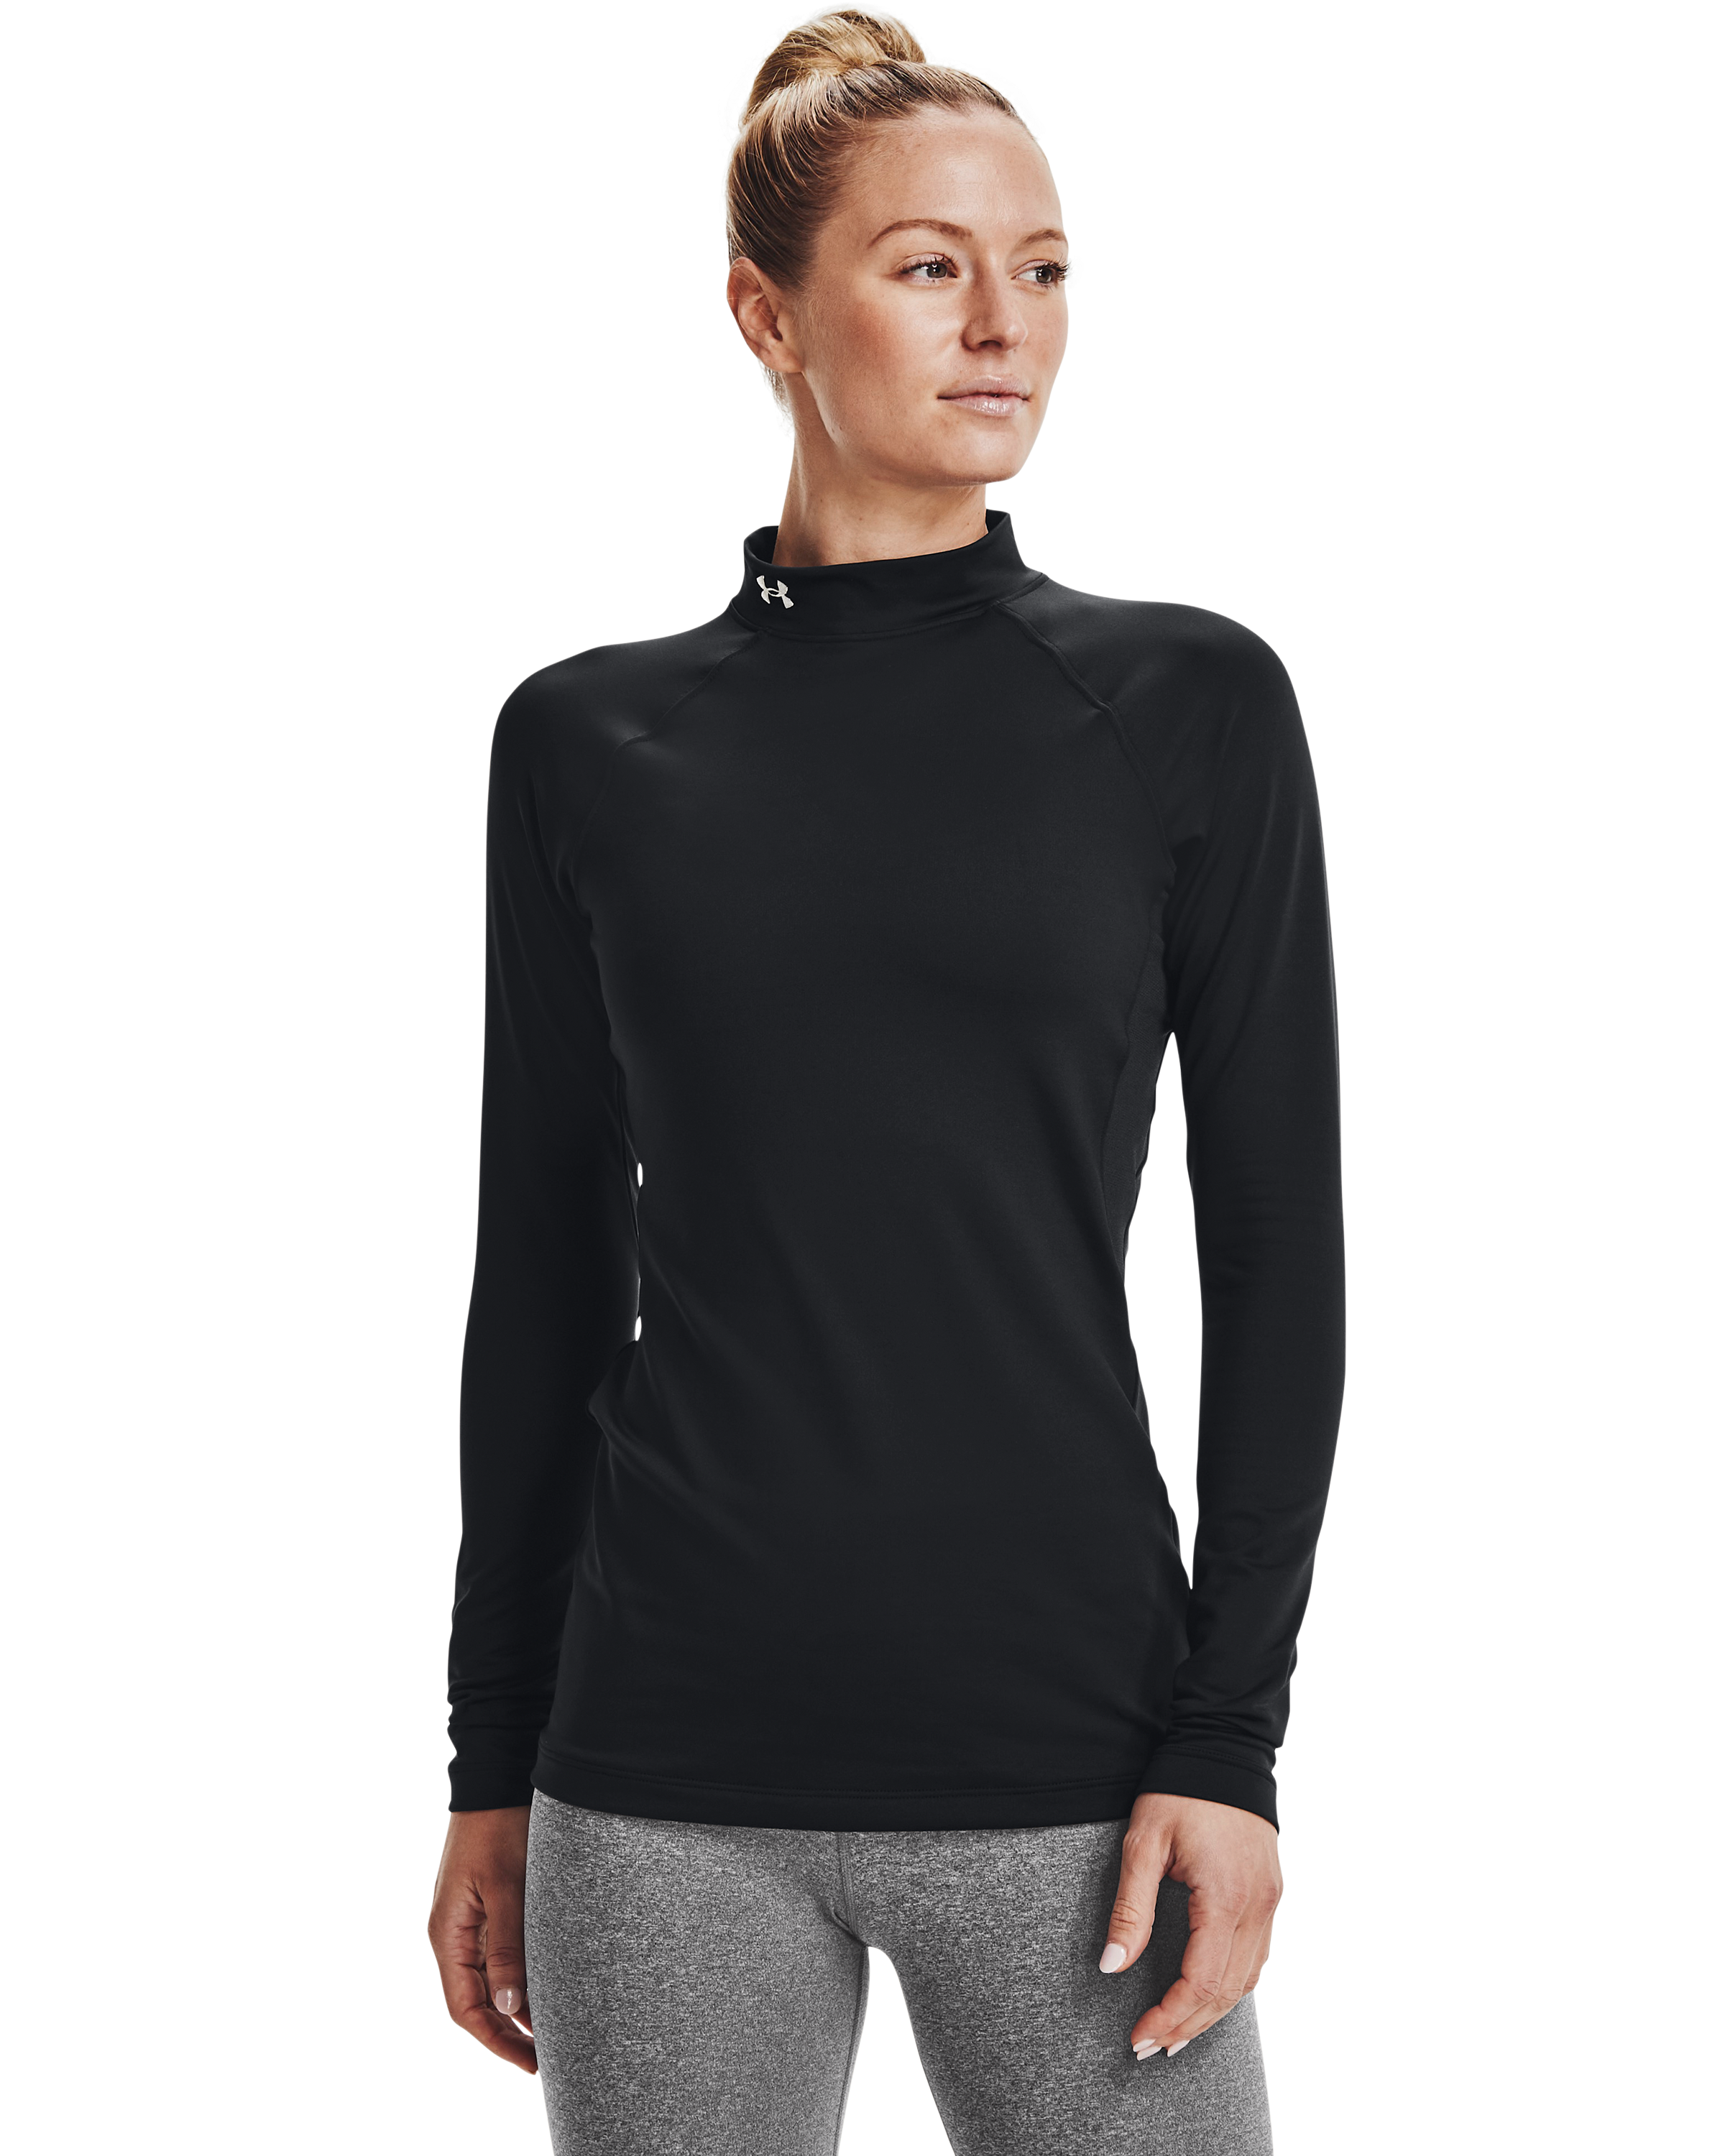 p>Under Armour Ladies ColdGear&Reg; Armour Fitted Mock Neck Golf Baselayer </p>